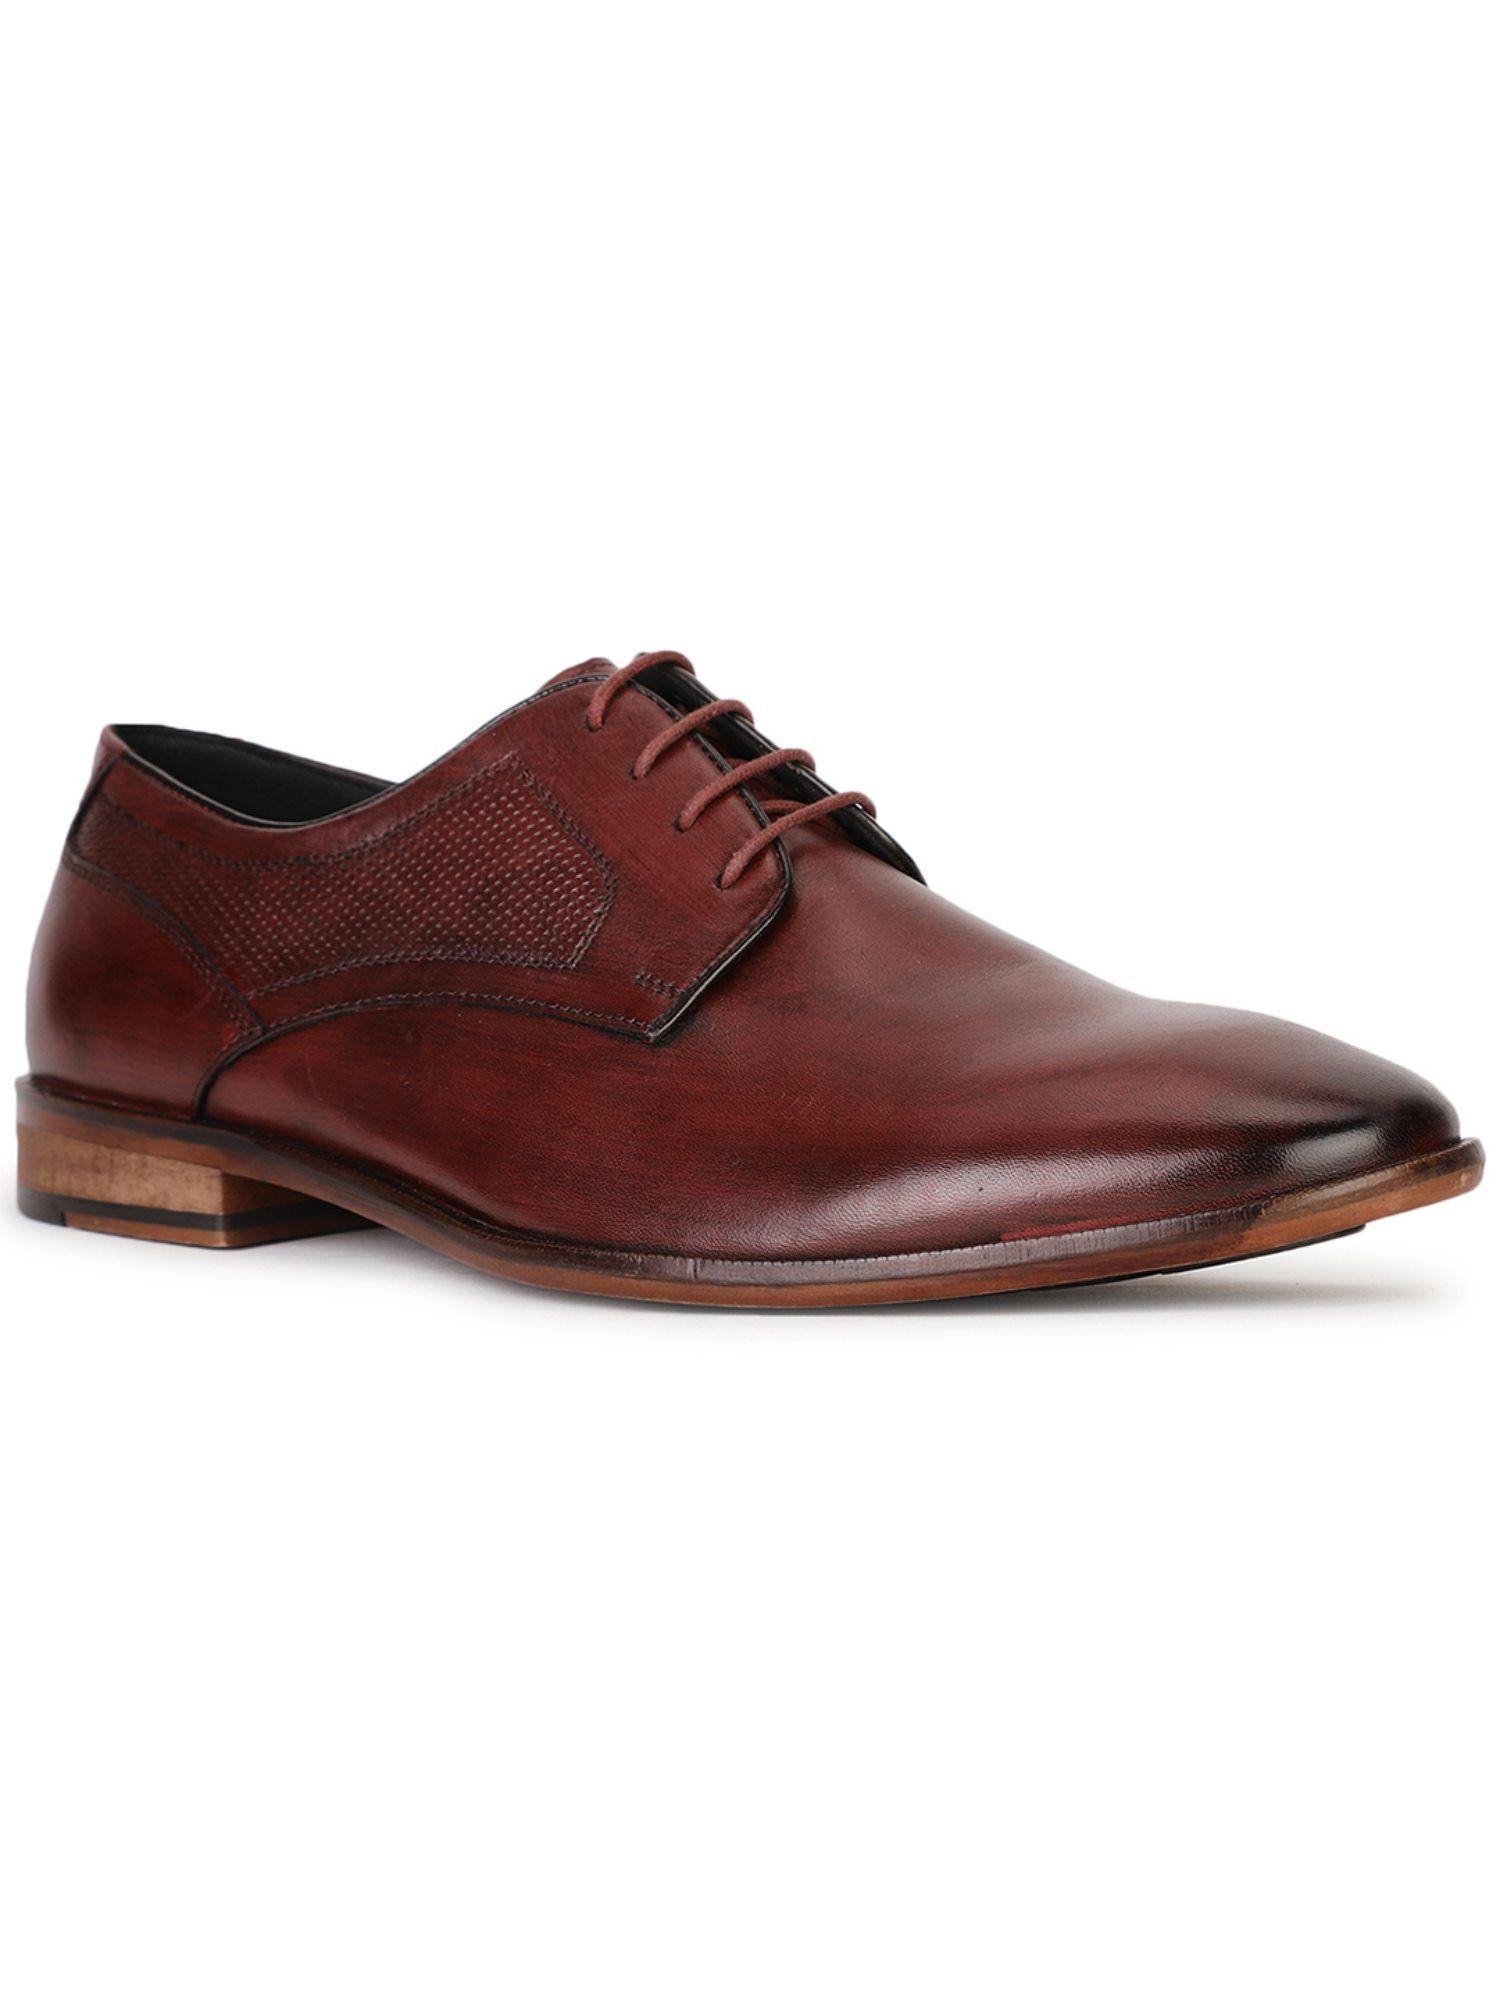 solid-brown-formal-derby-shoes